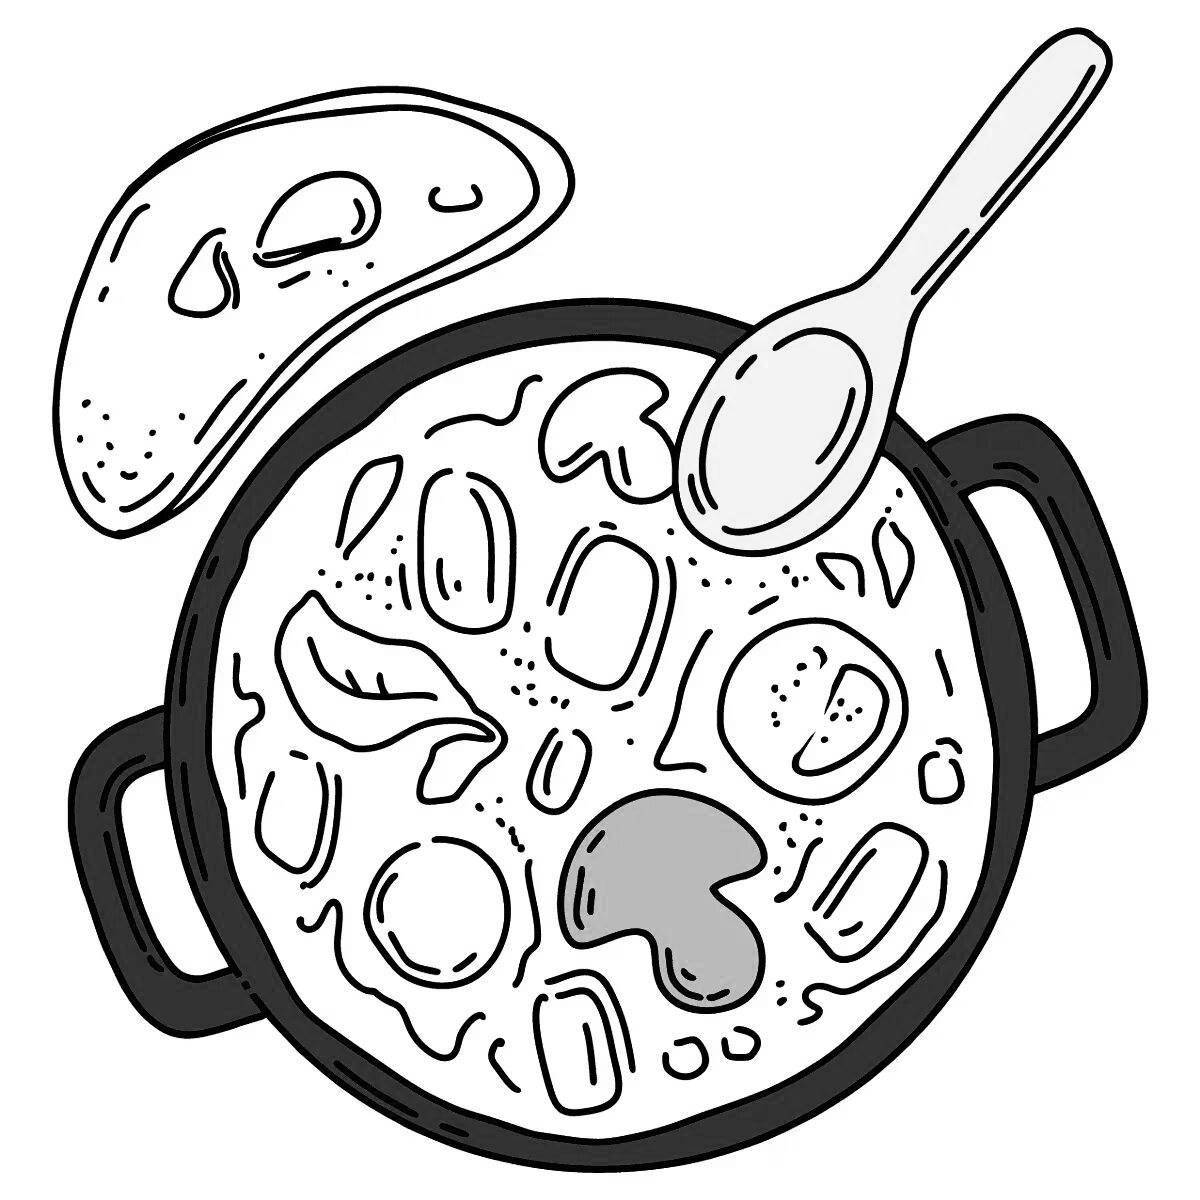 Luxury dinner coloring page